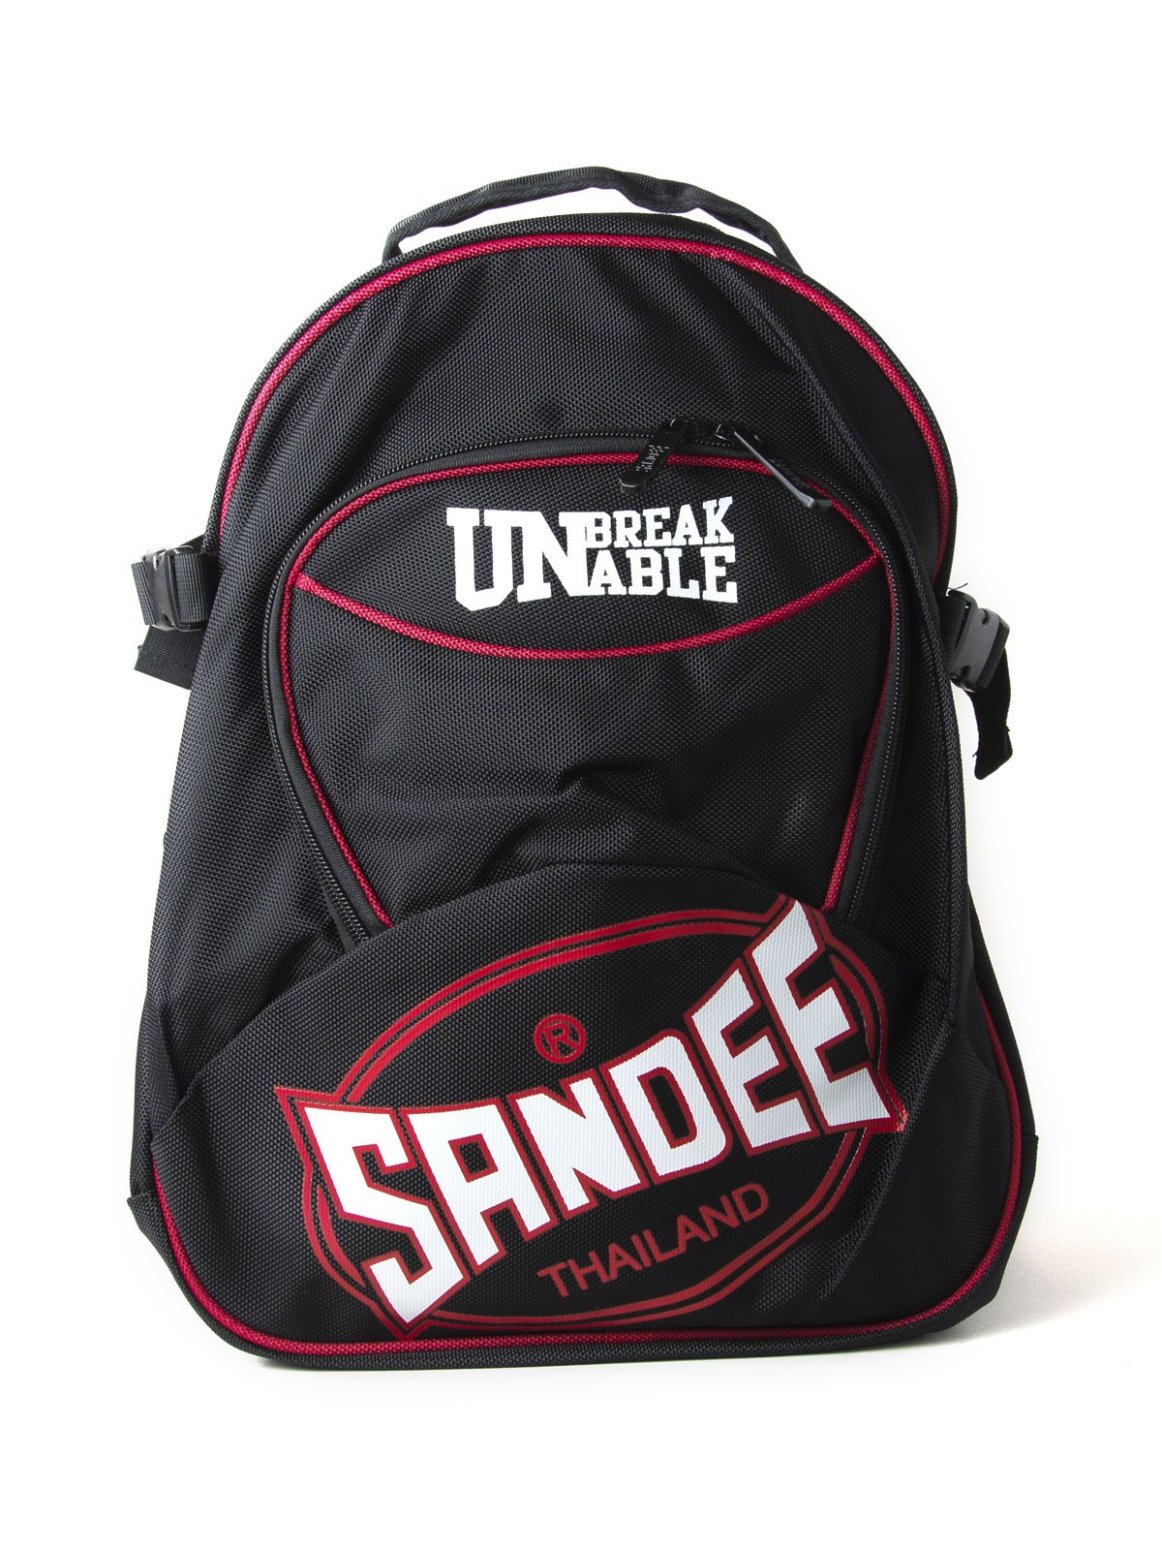 Sandee Heavy Duty Rip Stop Gym Sports Backpack - Click Image to Close